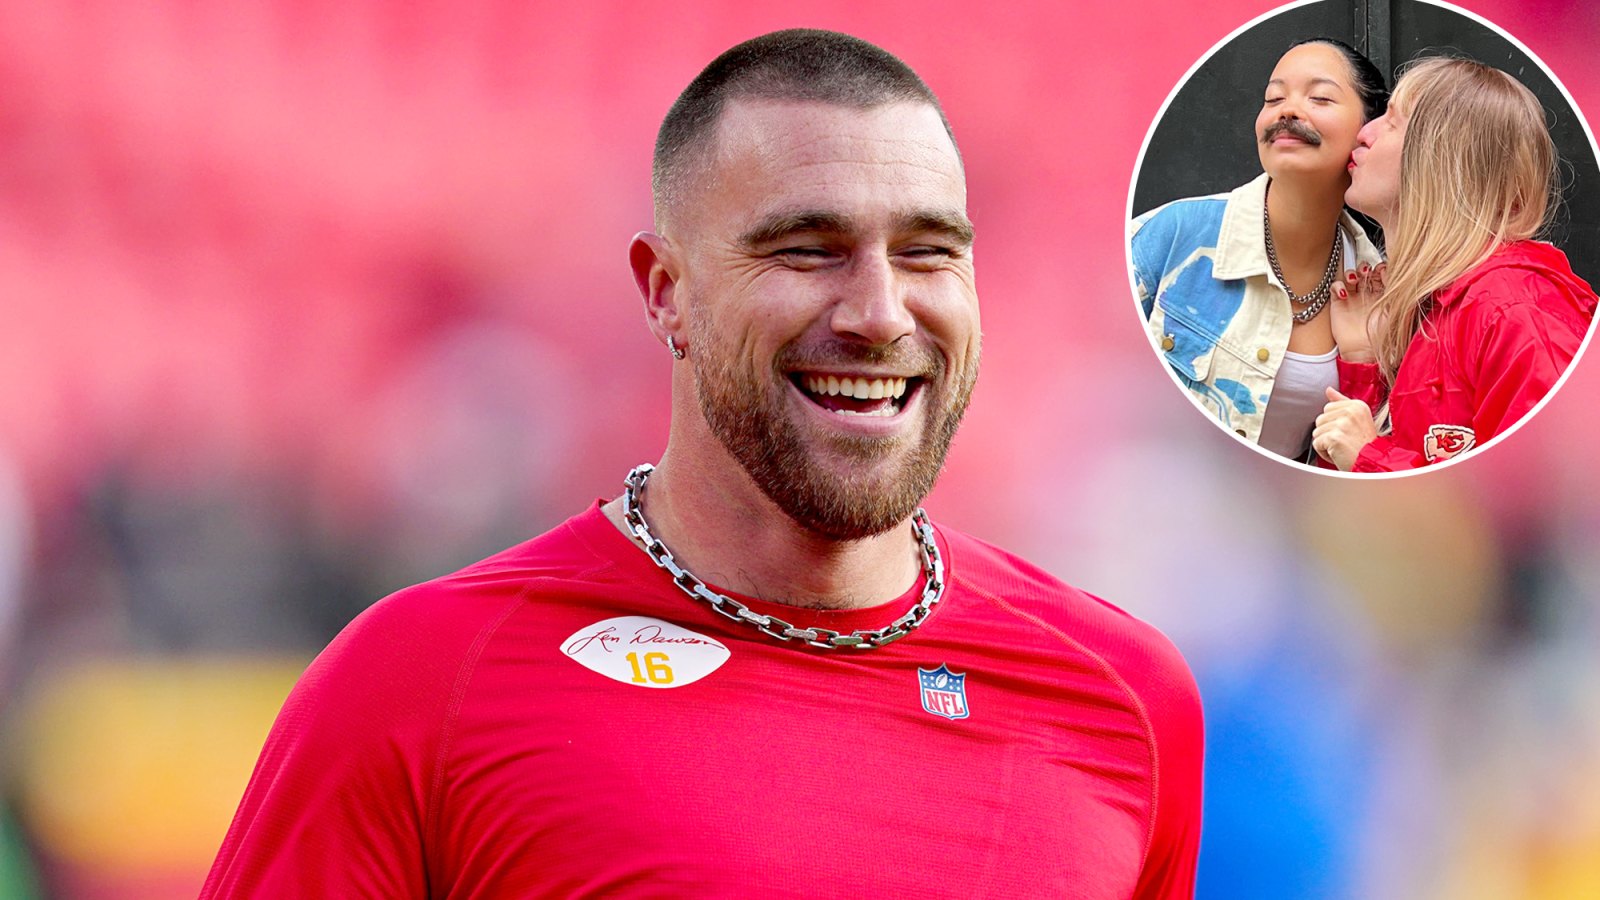 Travis Kelce Reacts to Halloween Costumes of Himself and Taylor Swift